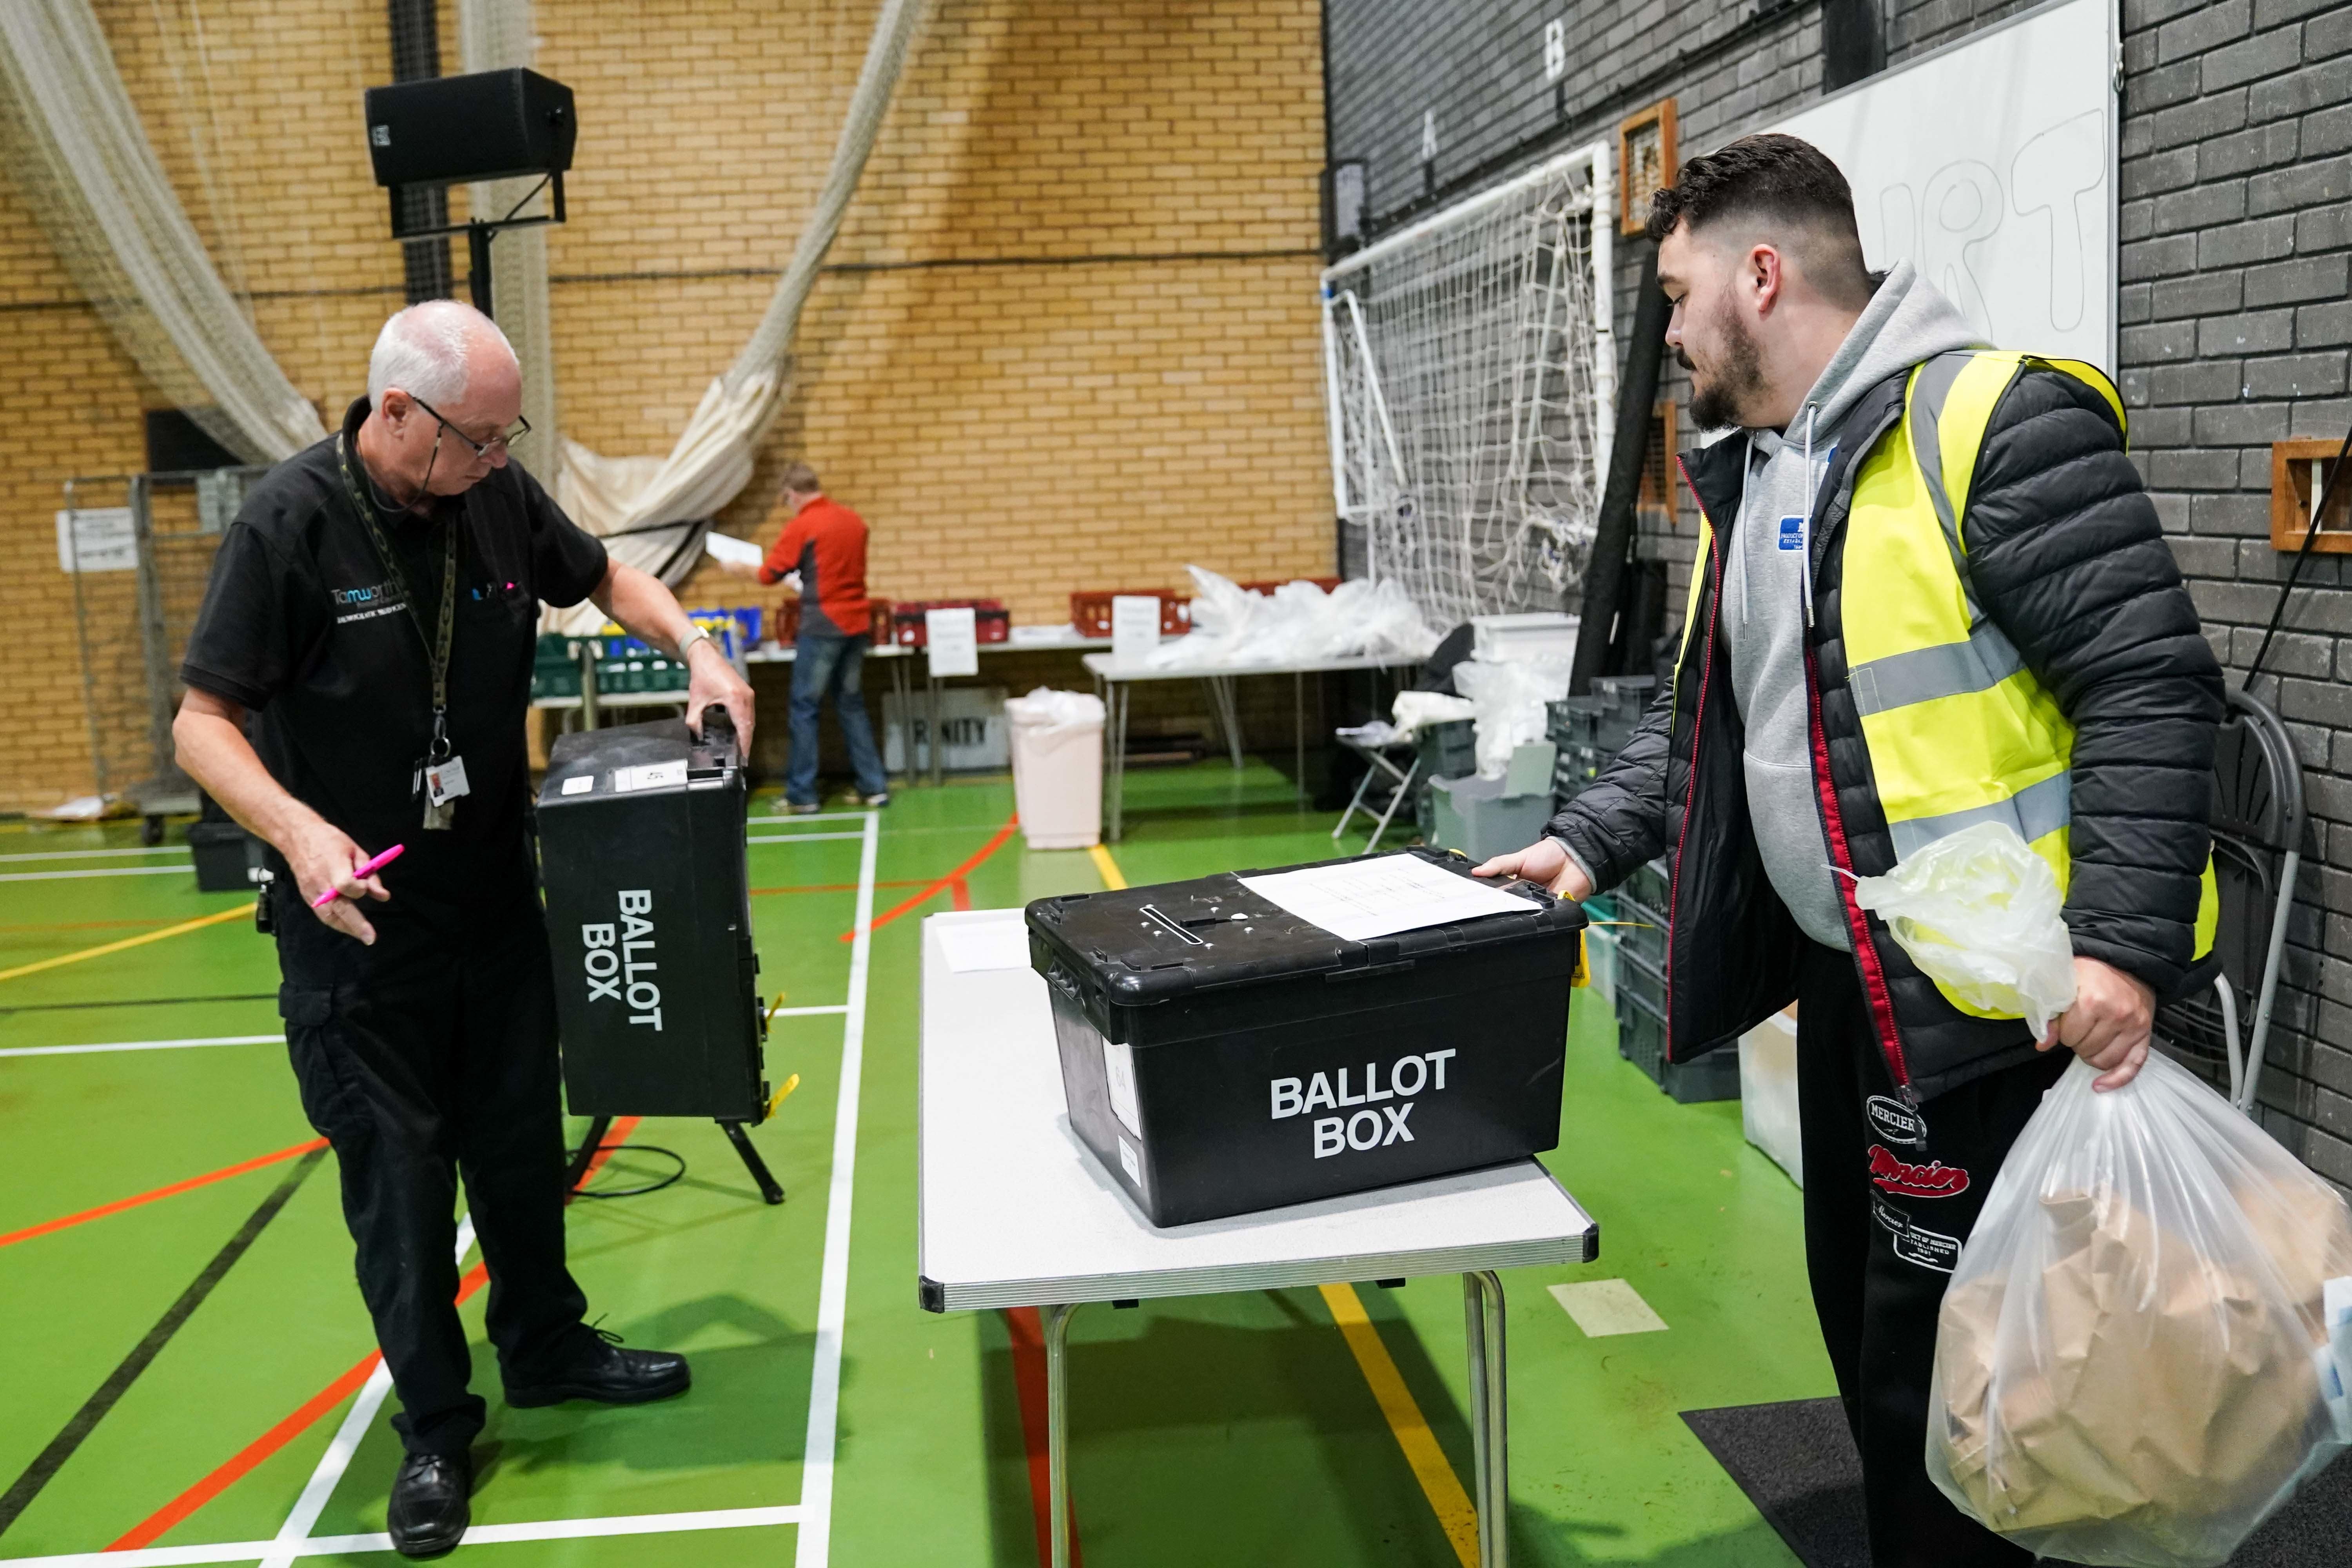 Ballot boxes are delivered for the Tamworth by-election at The Rawlett School (PA)